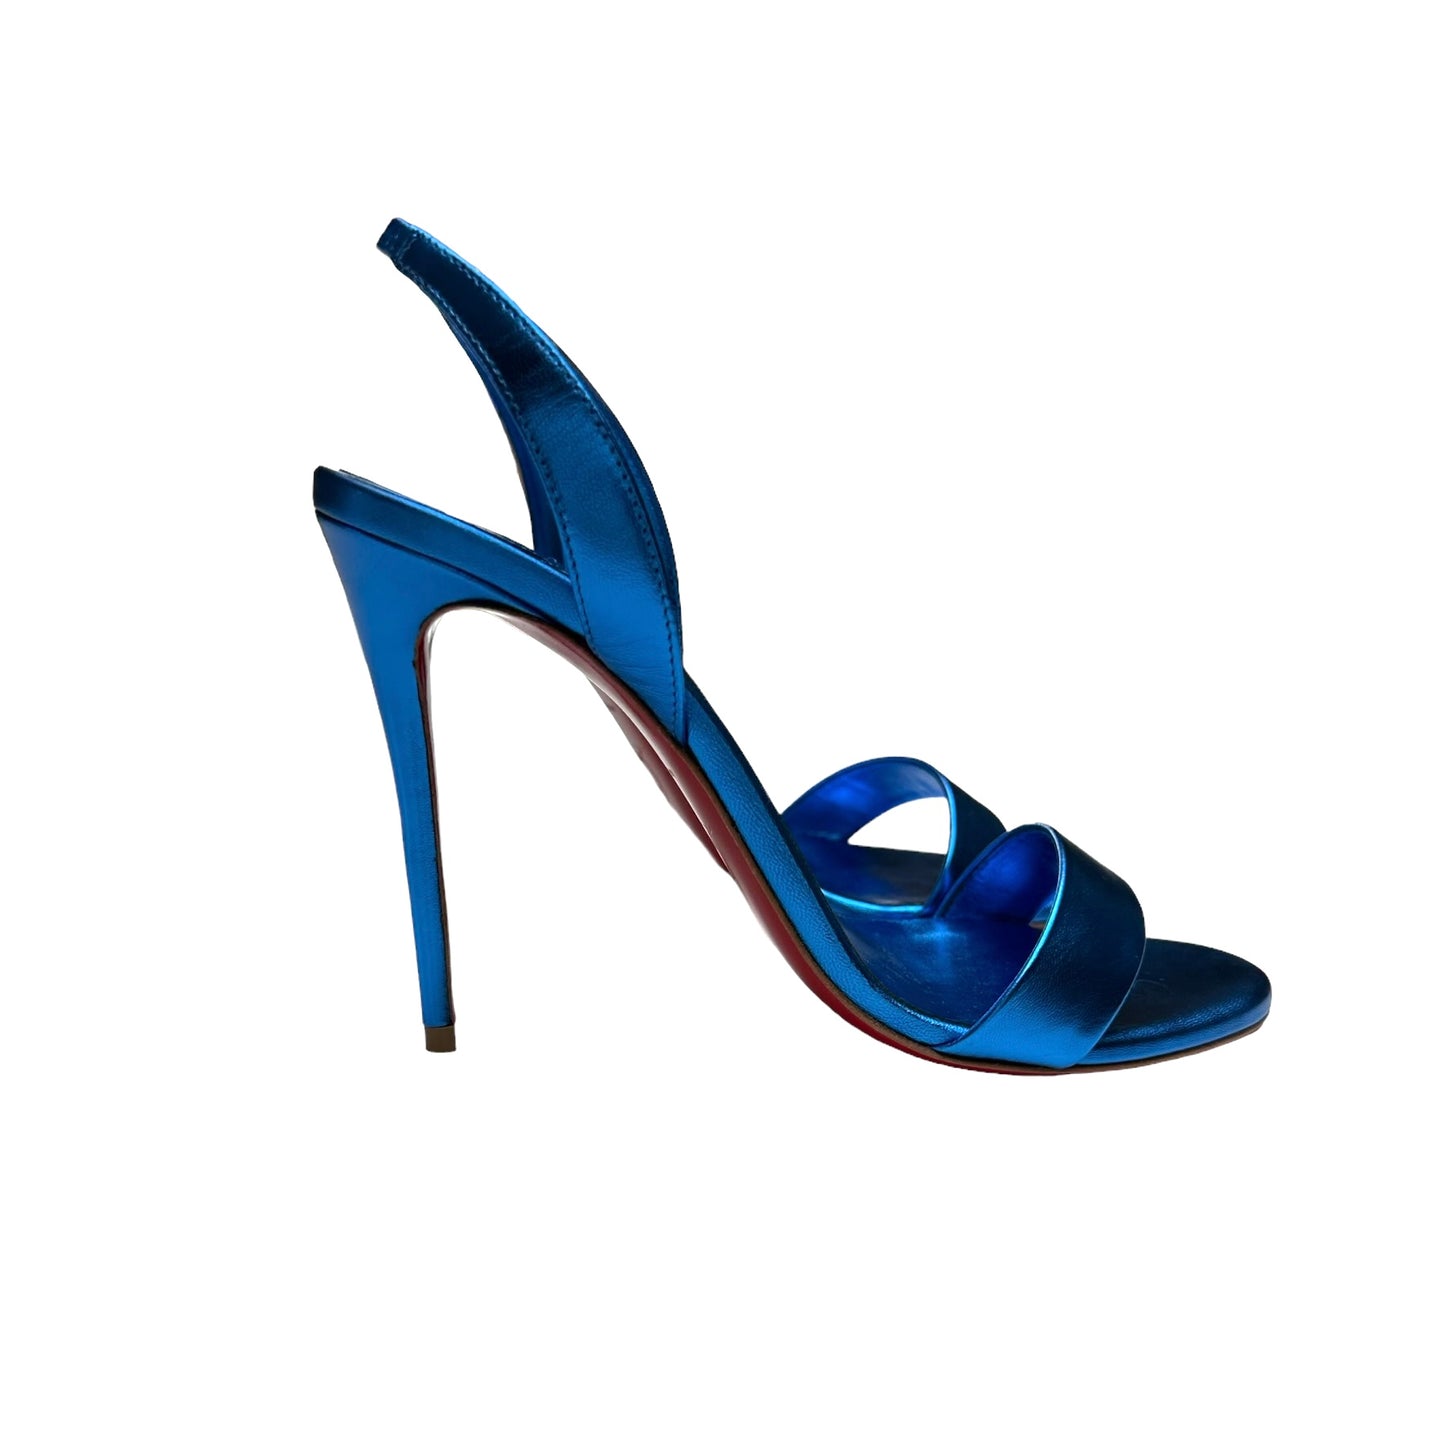 Blue Patent Leather Heels - 7